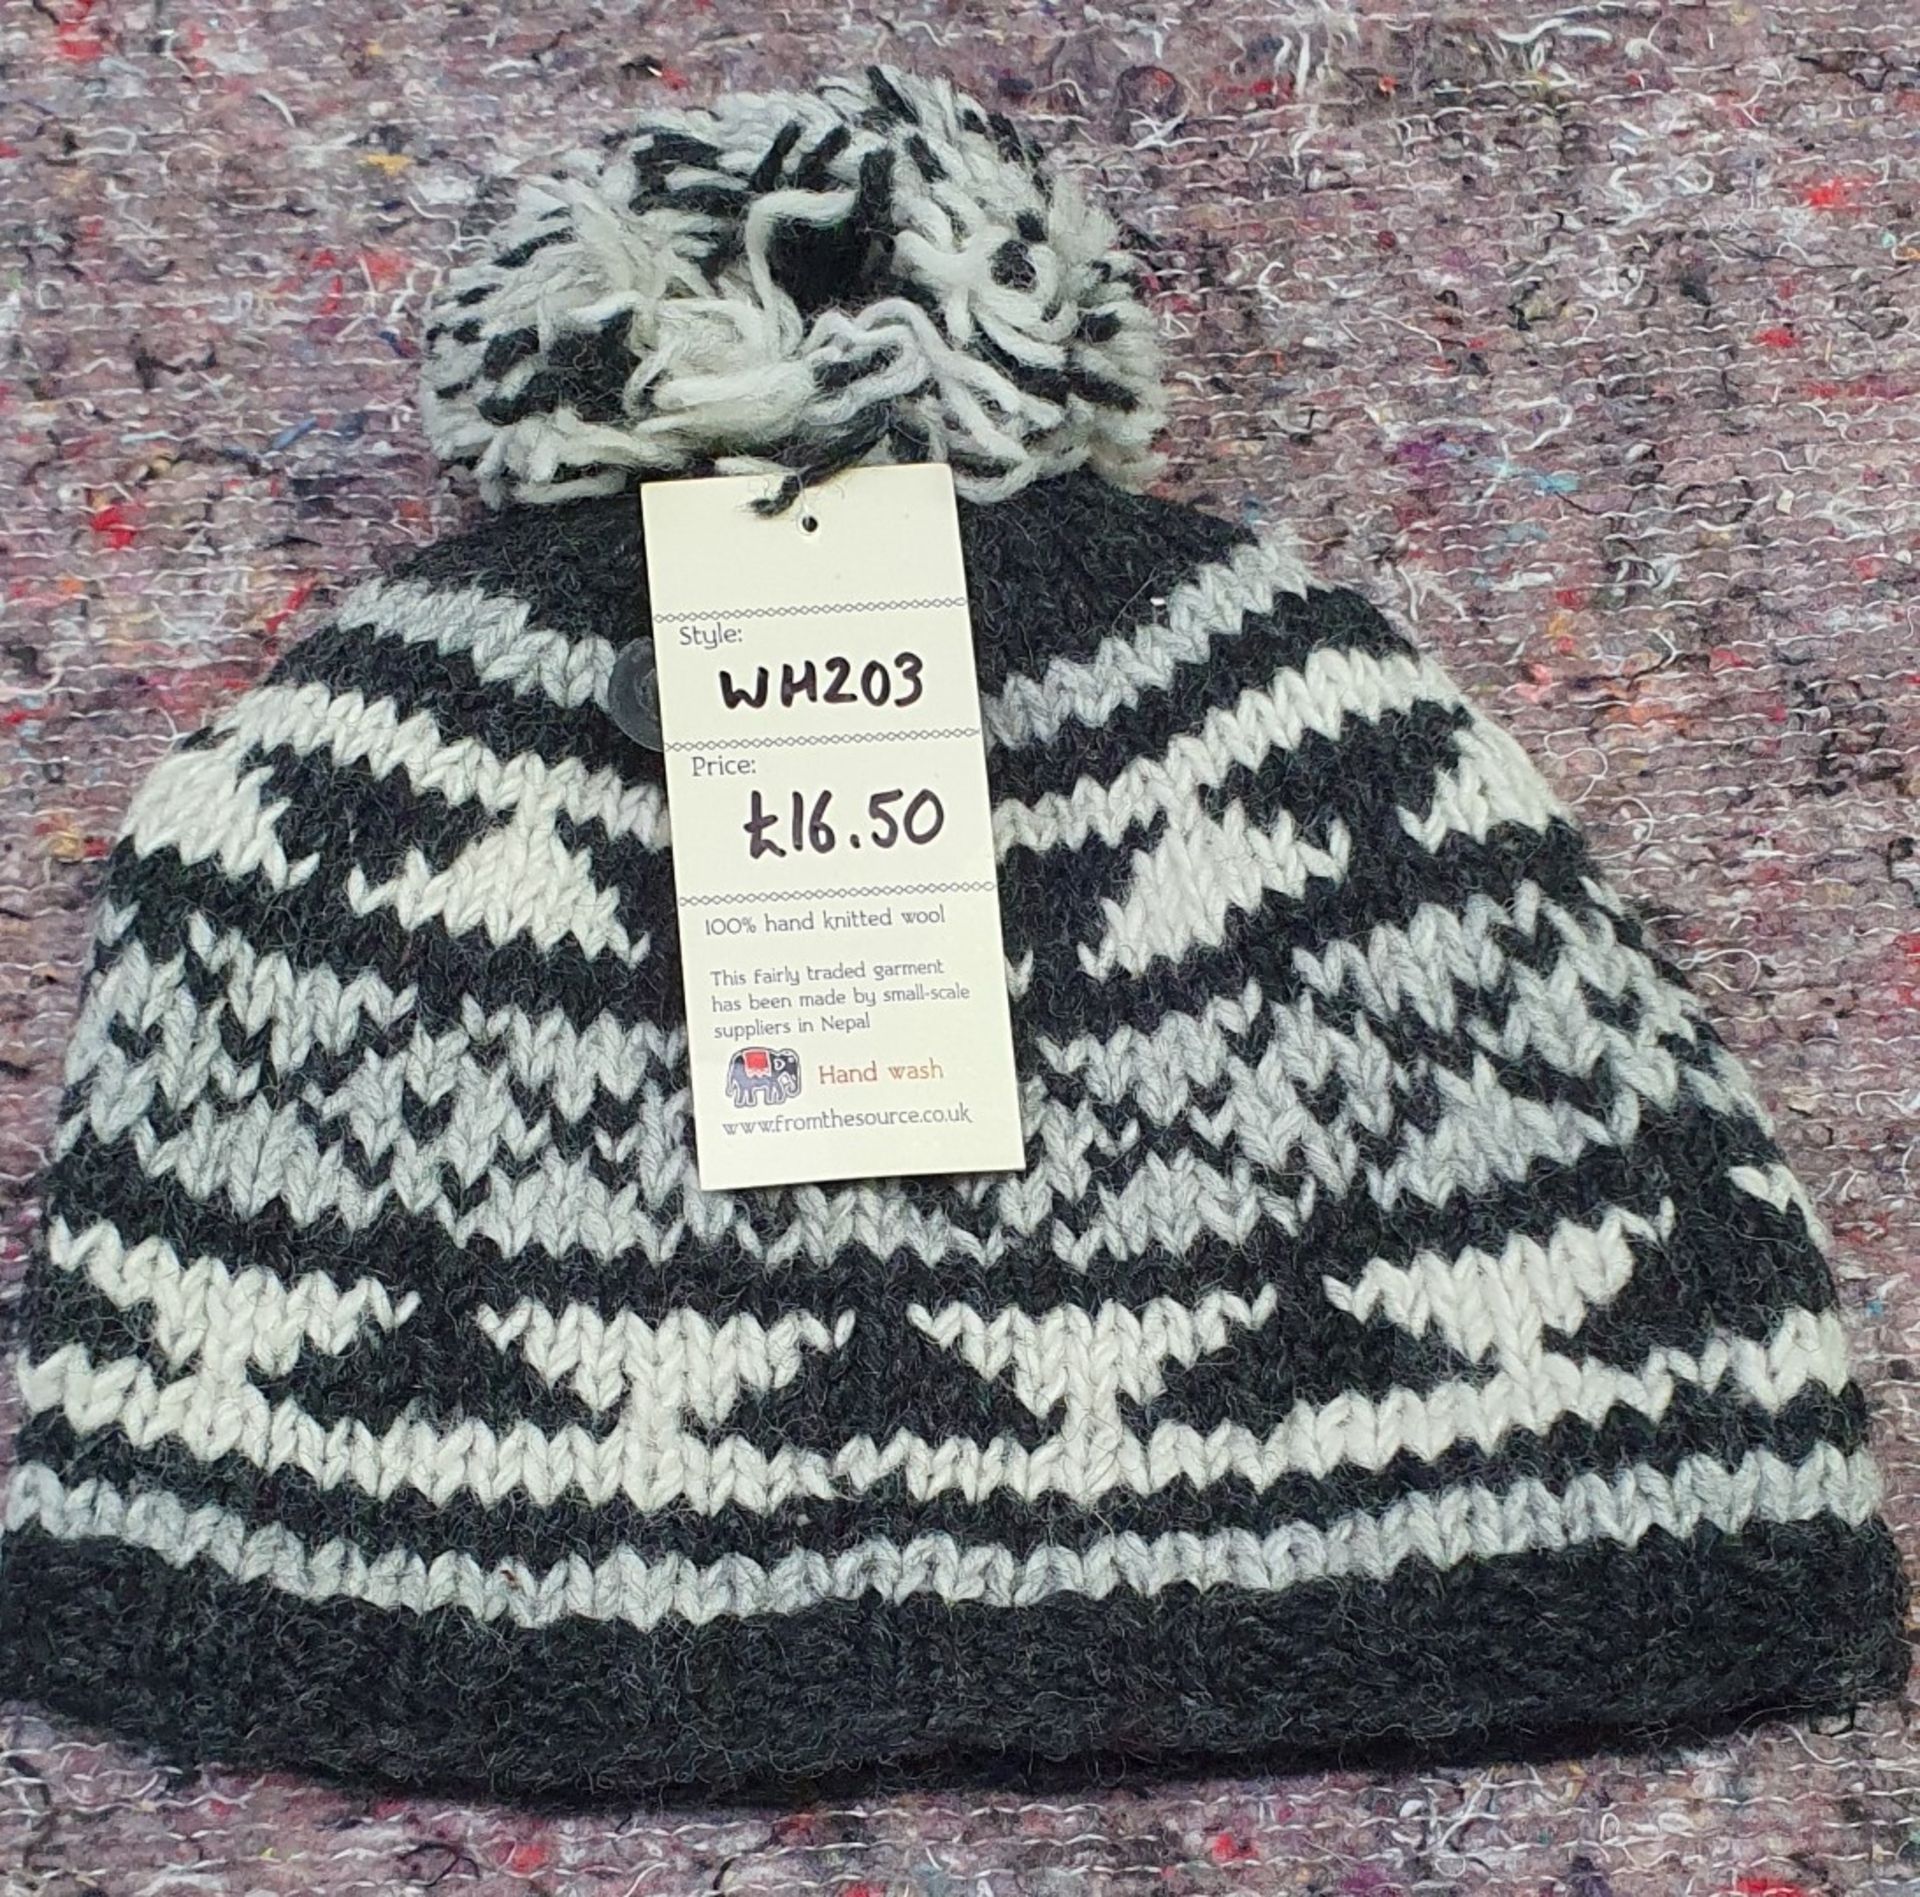 13 x Assorted Bobble Hats and Woolly Gloves by From The Source - New Stock - Ref: TCH236 - CL840 - - Image 9 of 24